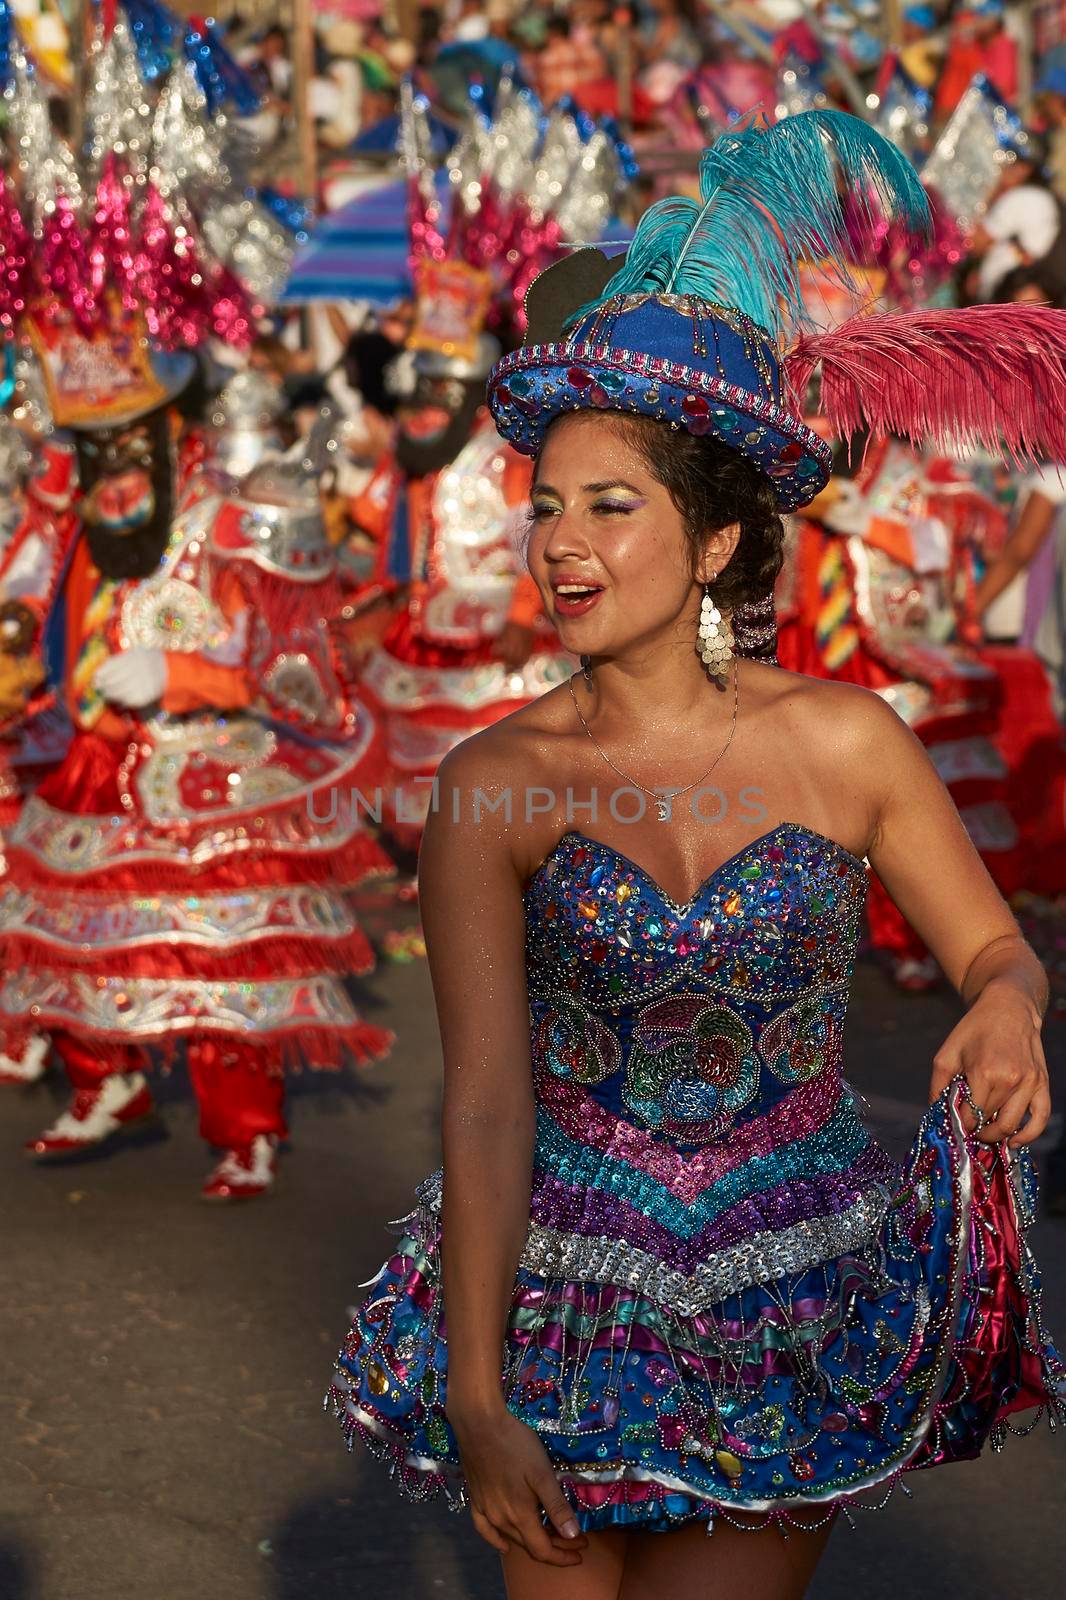 Arica, Chile - January 23, 2016: Morenada dance group performing a traditional ritual dance as part of the Carnaval Andino con la Fuerza del Sol in Arica, Chile.